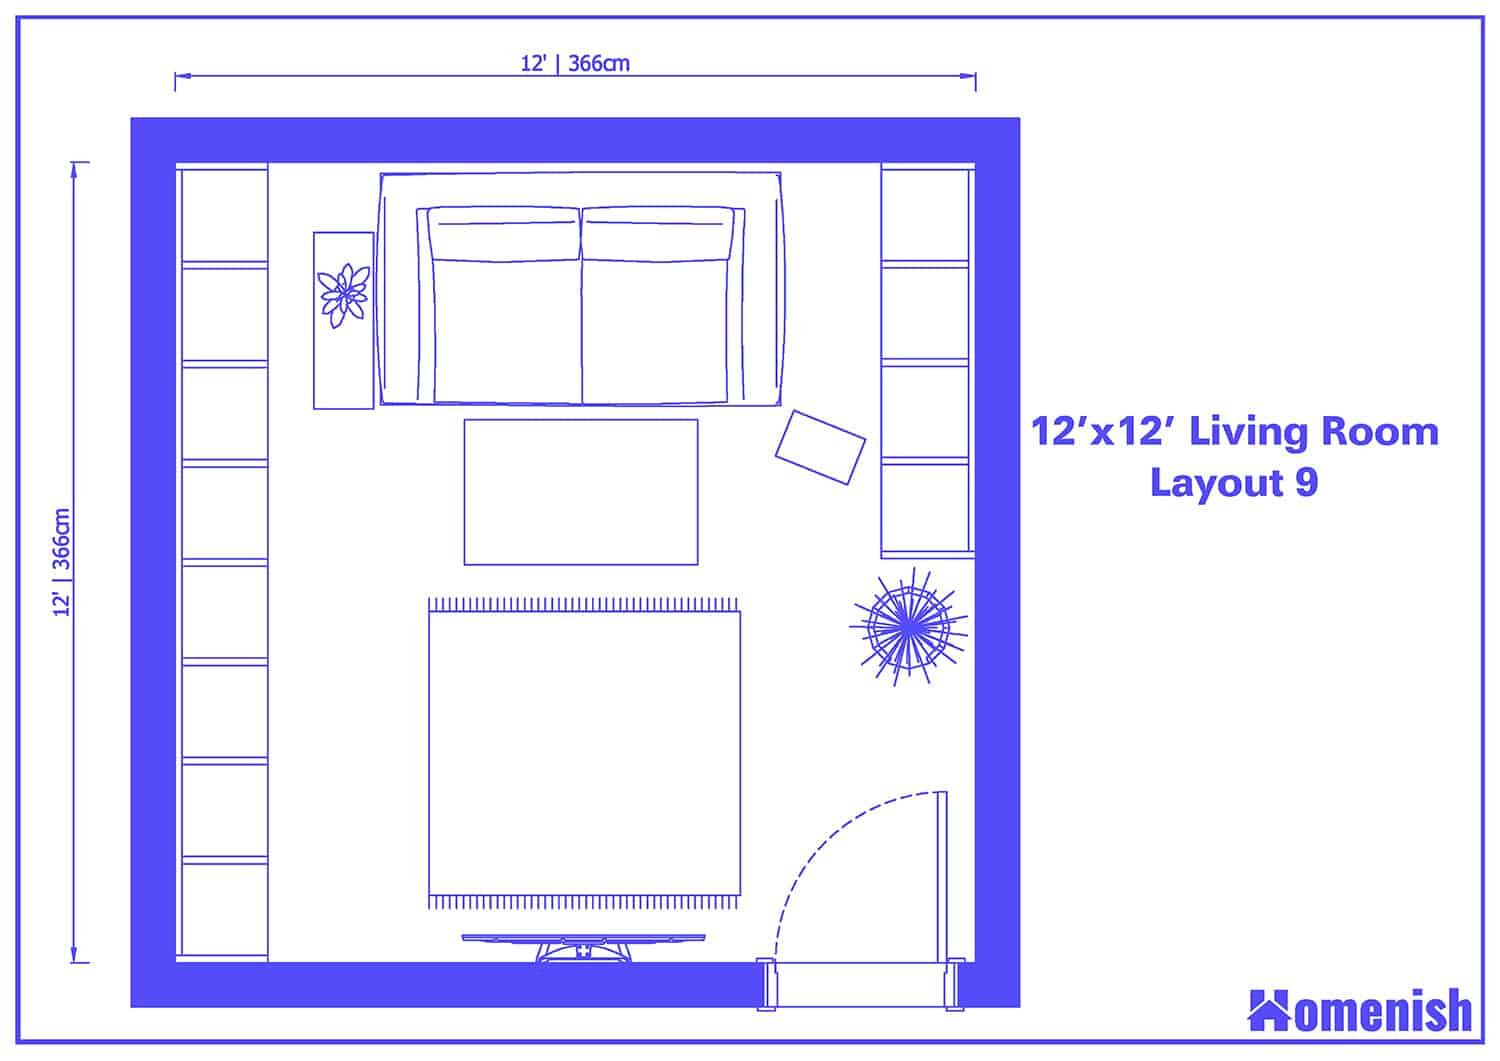 12' x 12' Living Room Layout 9